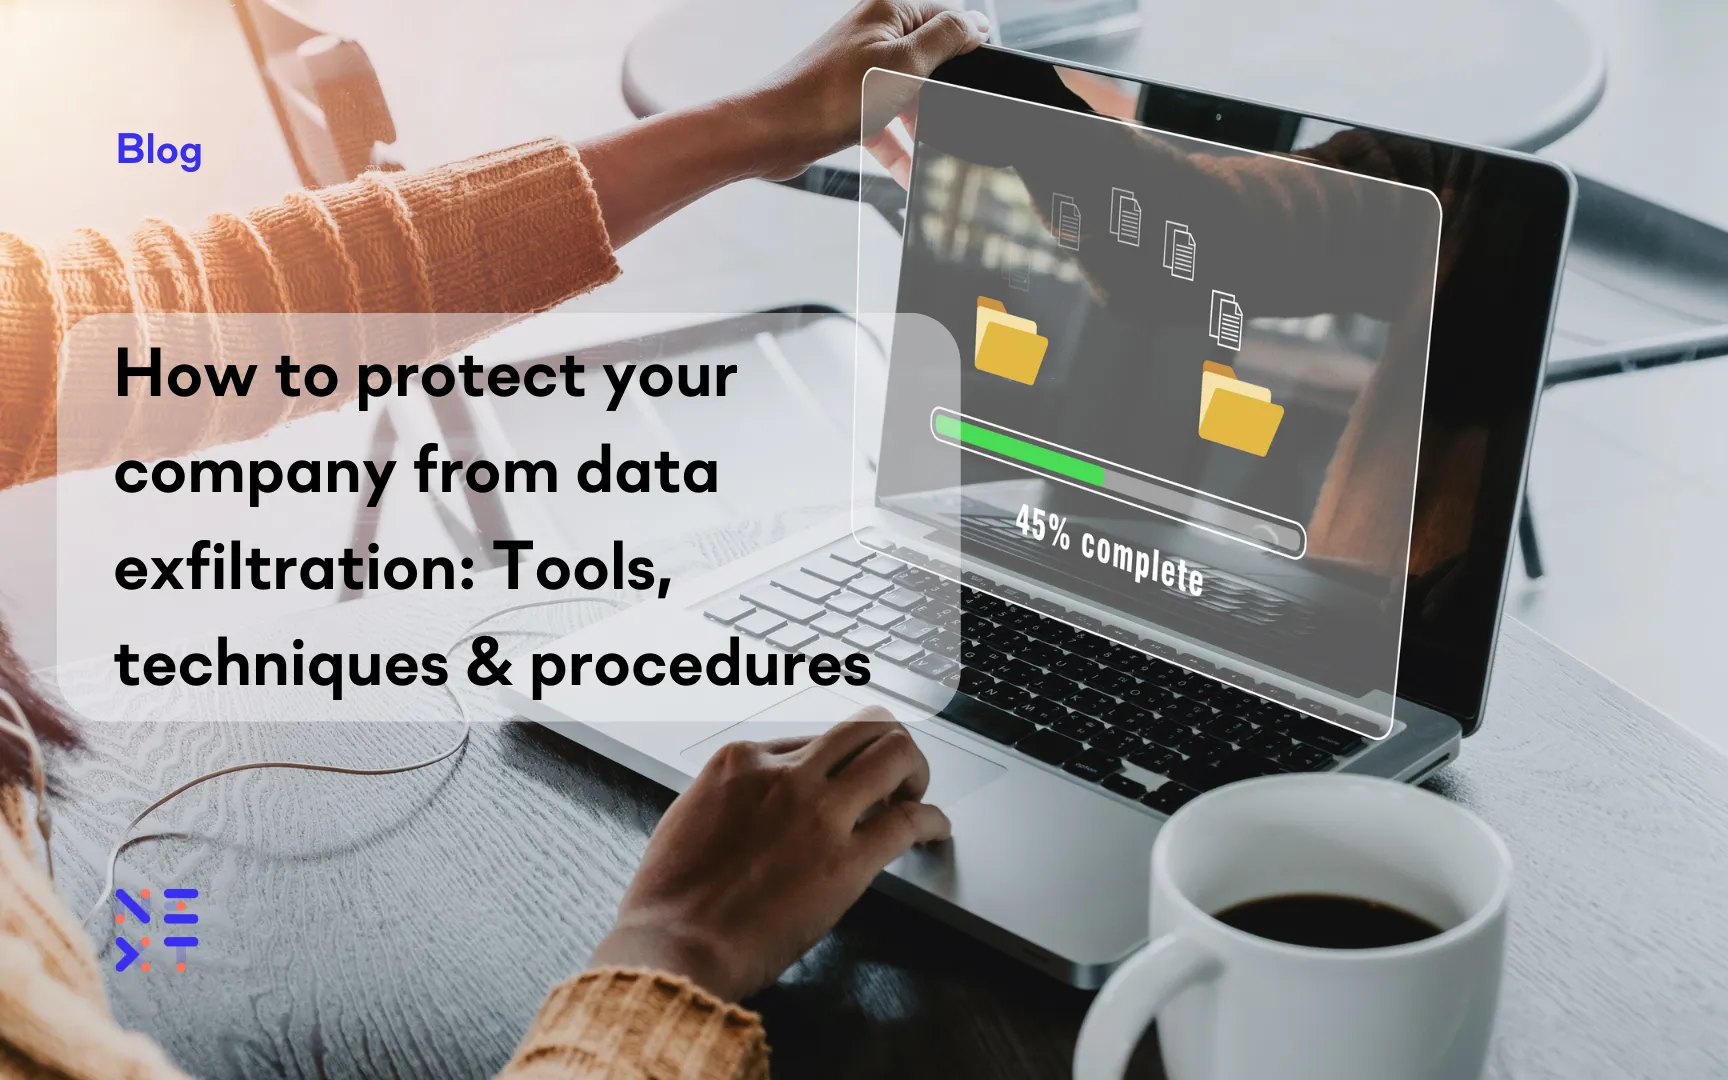 How to protect your company from data exfiltration: Tools, techniques & procedures